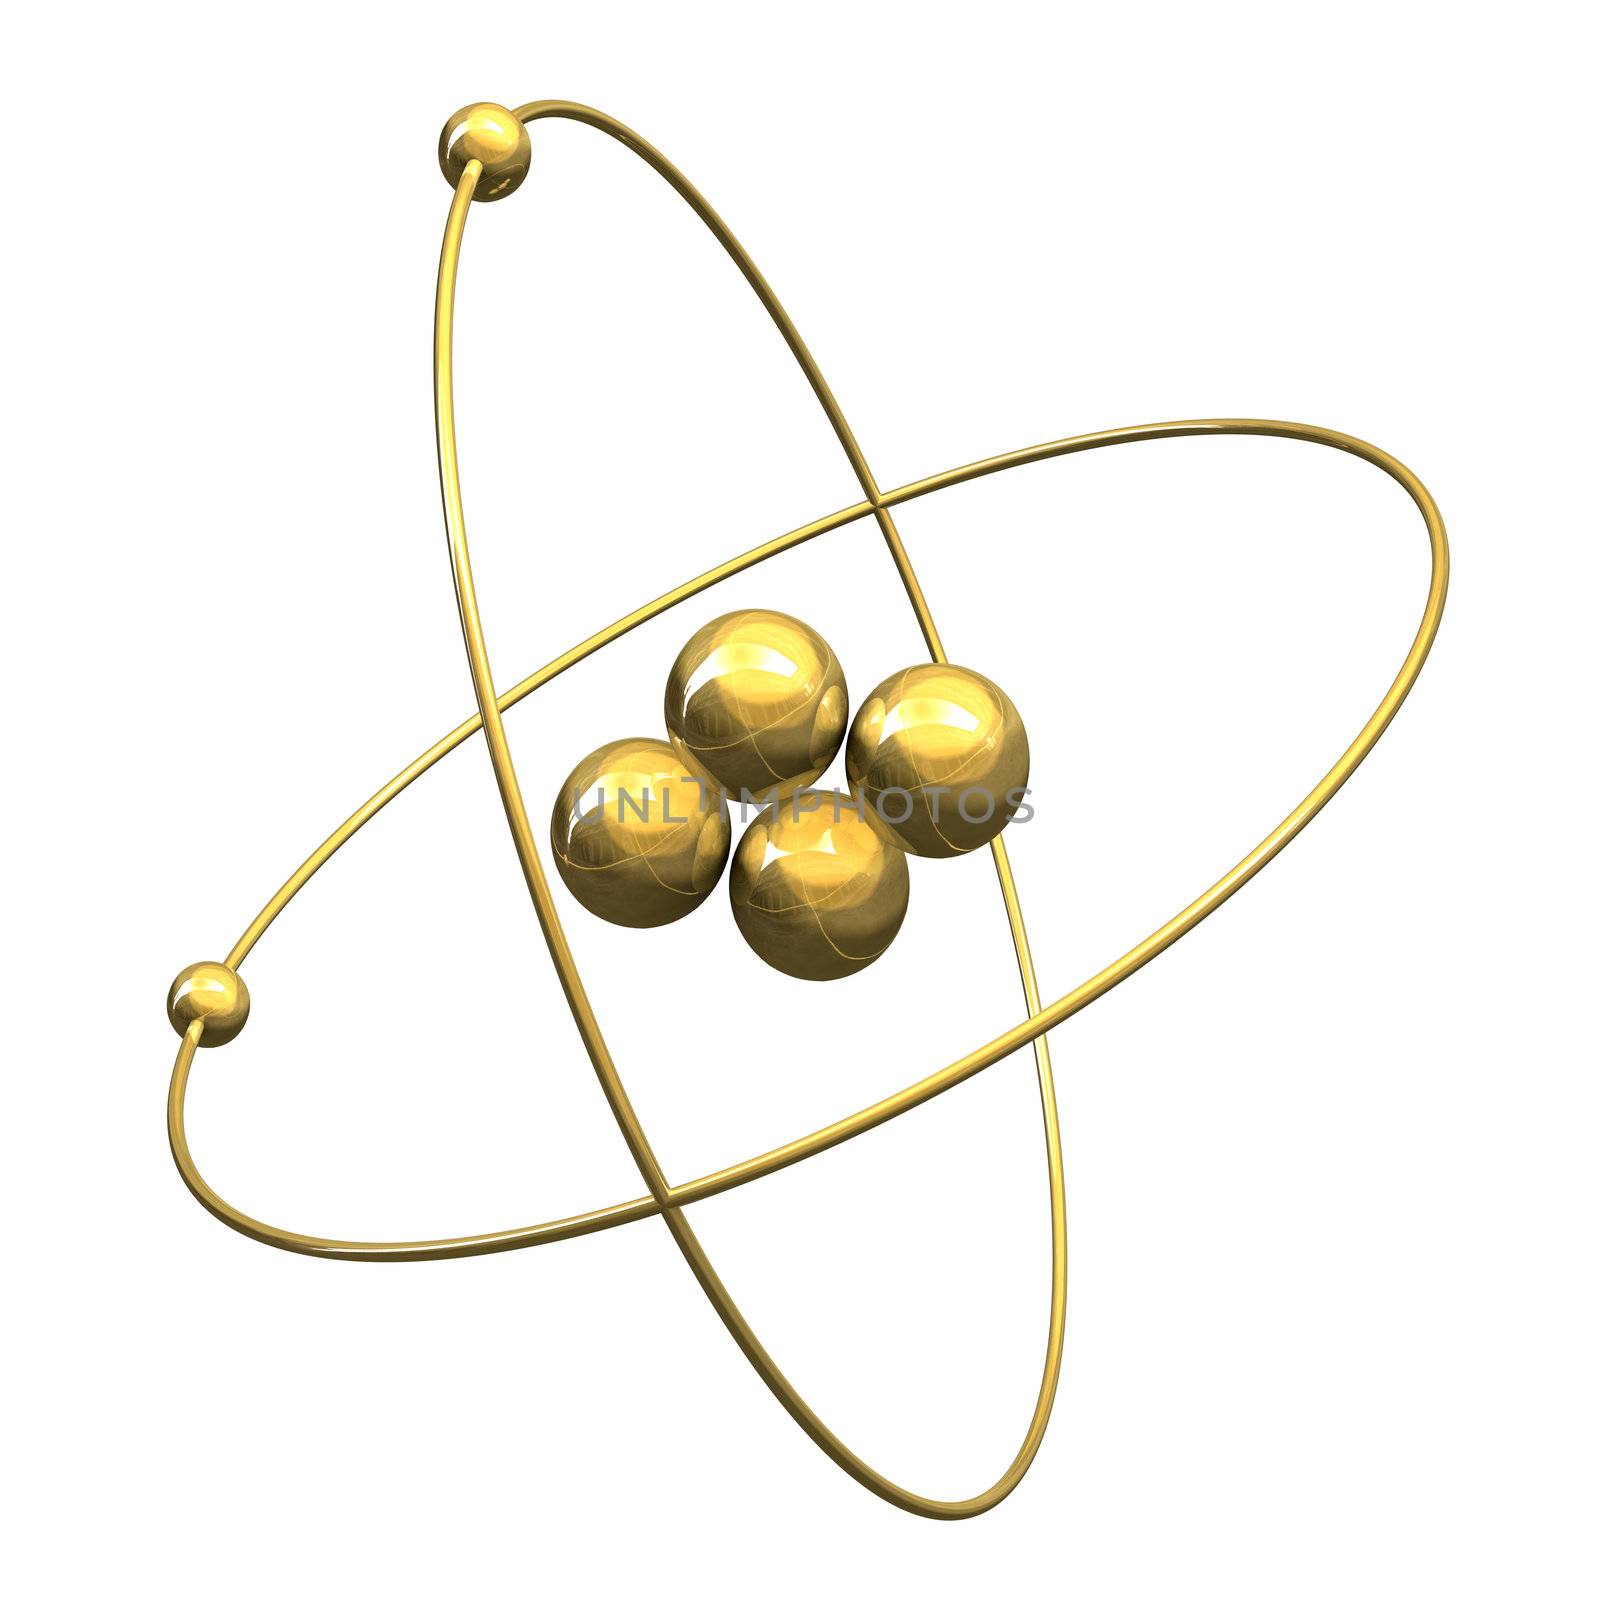 3d made - Helium Atom in gold 